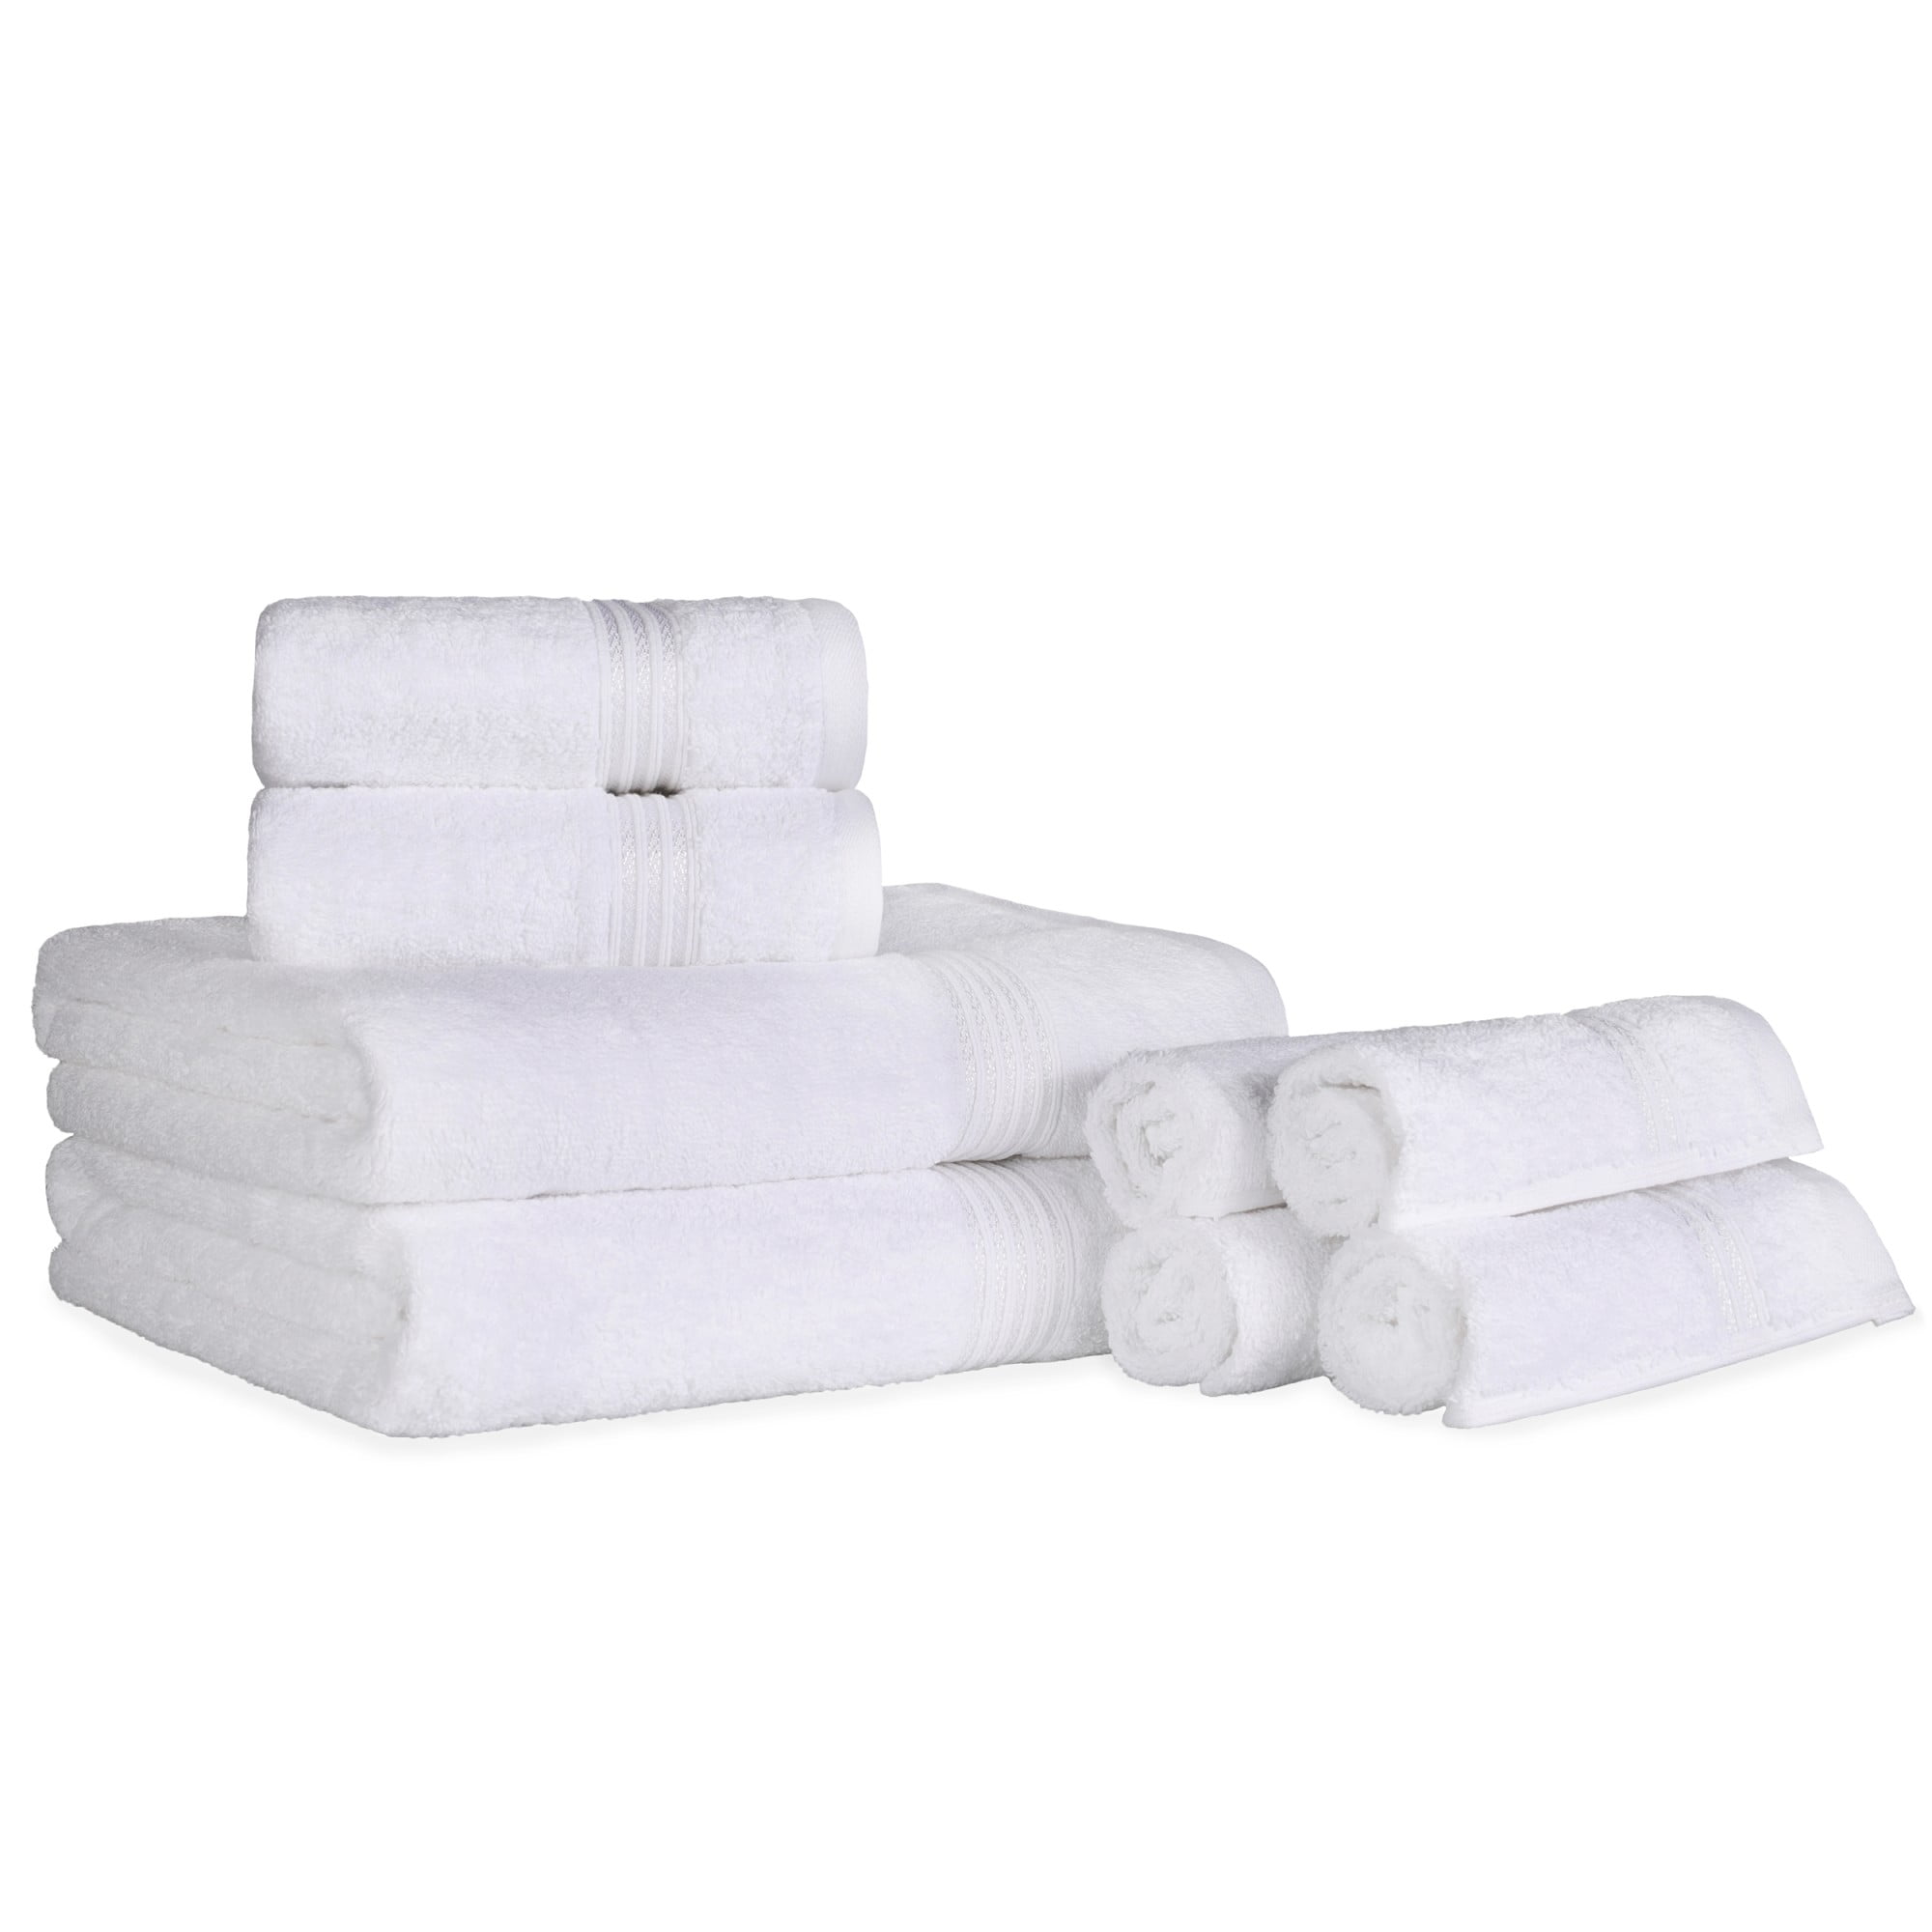 White Classic Luxury Hand Towels Soft Circlet Egyptian CottonHighly Absorbe 